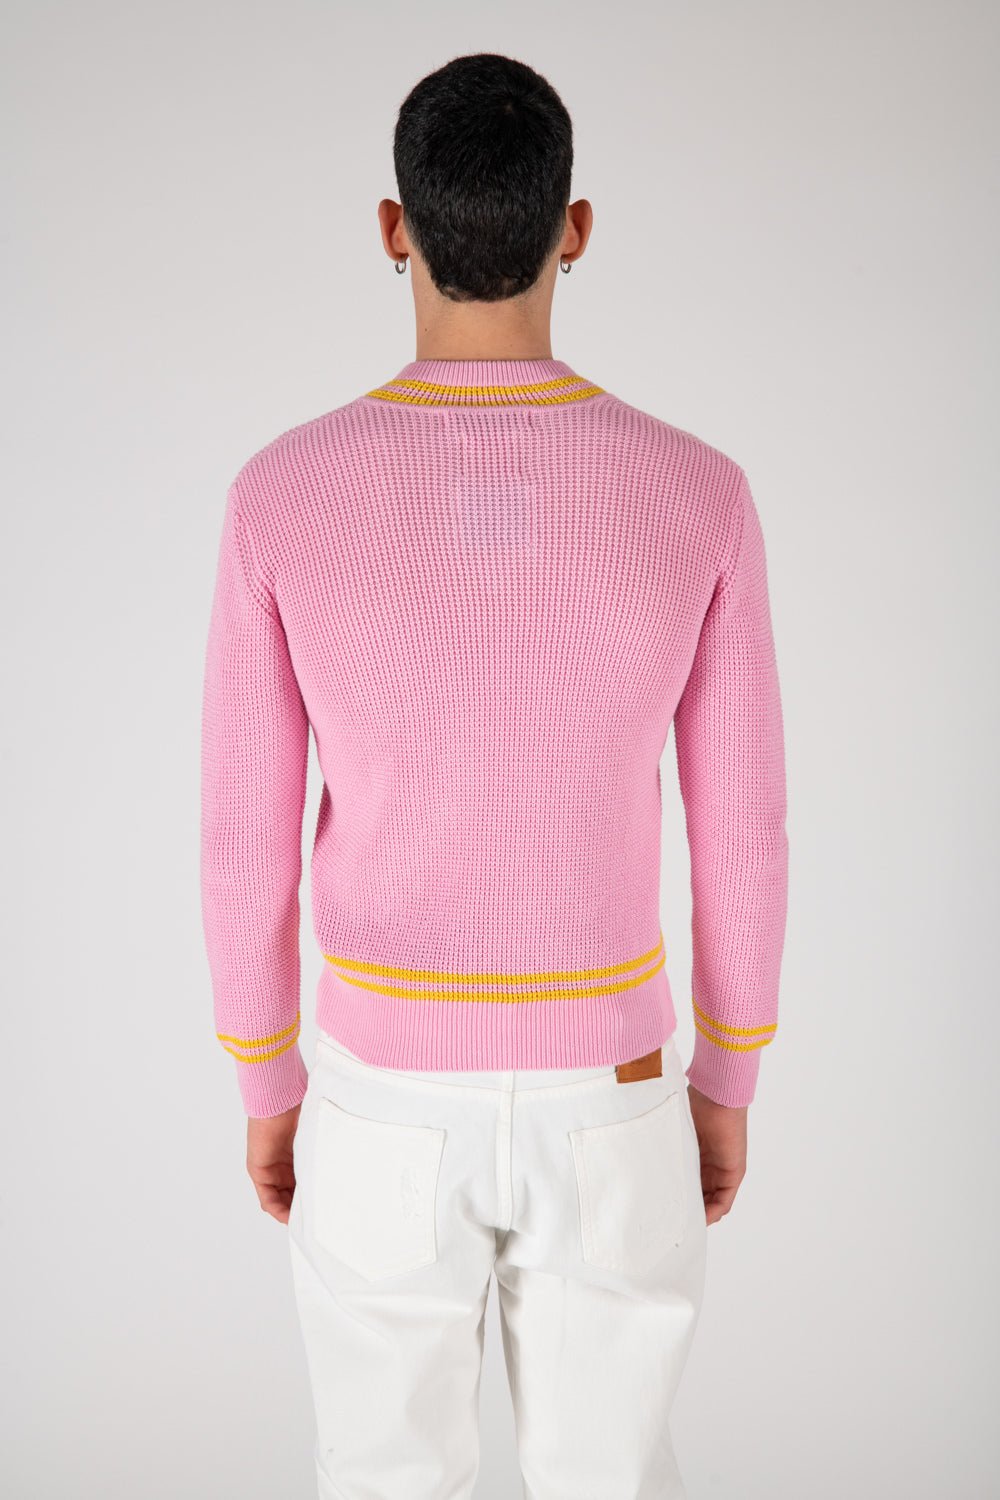 VISITOR Pink sweater with front logo patch. Composition: 100% Cotton HTC LOS ANGELES